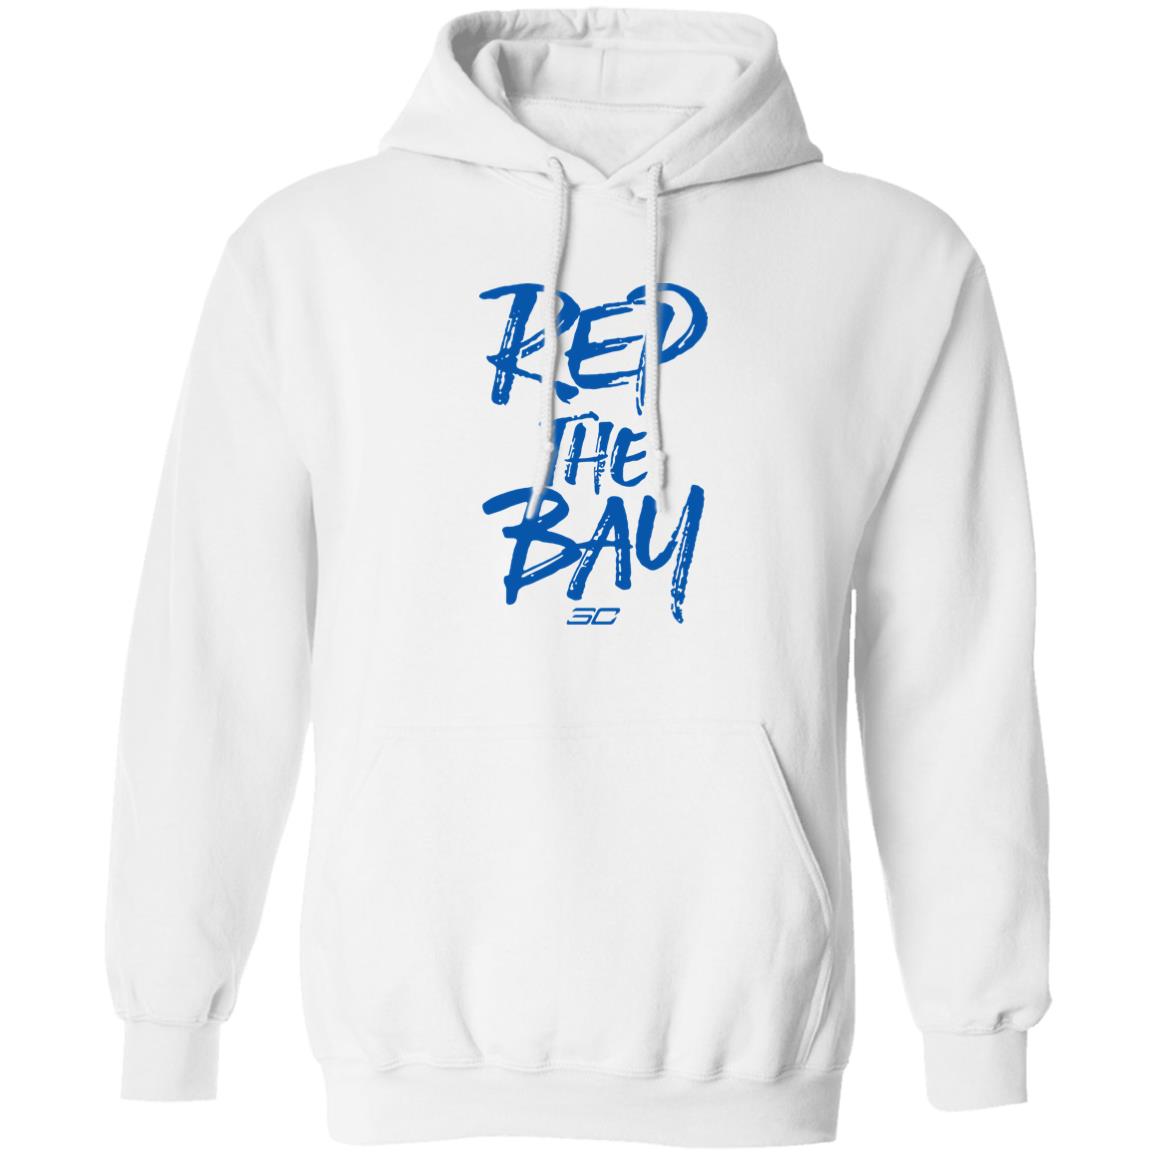 Stephen Curry Rep The Bay Shirt 2